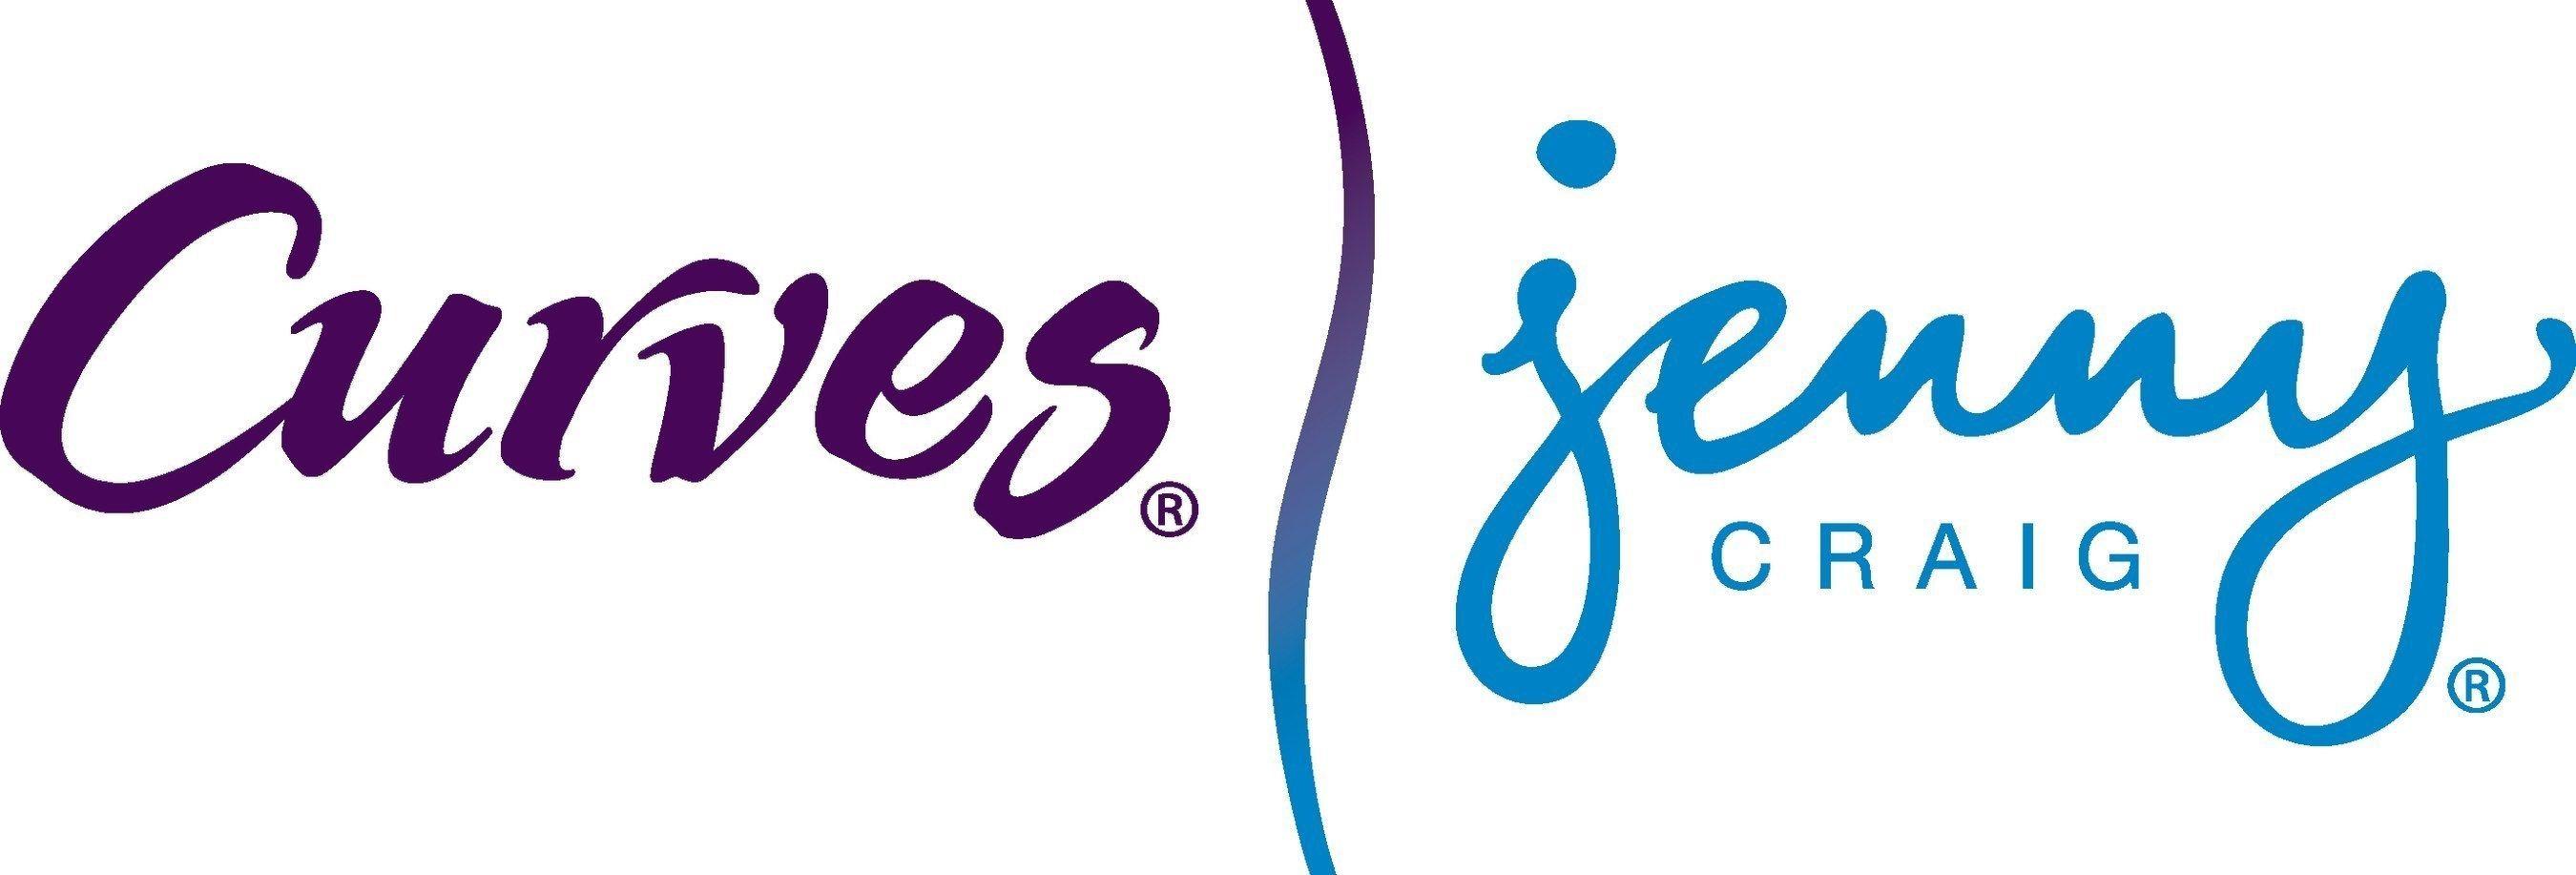 Curves Logo - Curves and Jenny Craig Come Together to Create a Complete Fitness